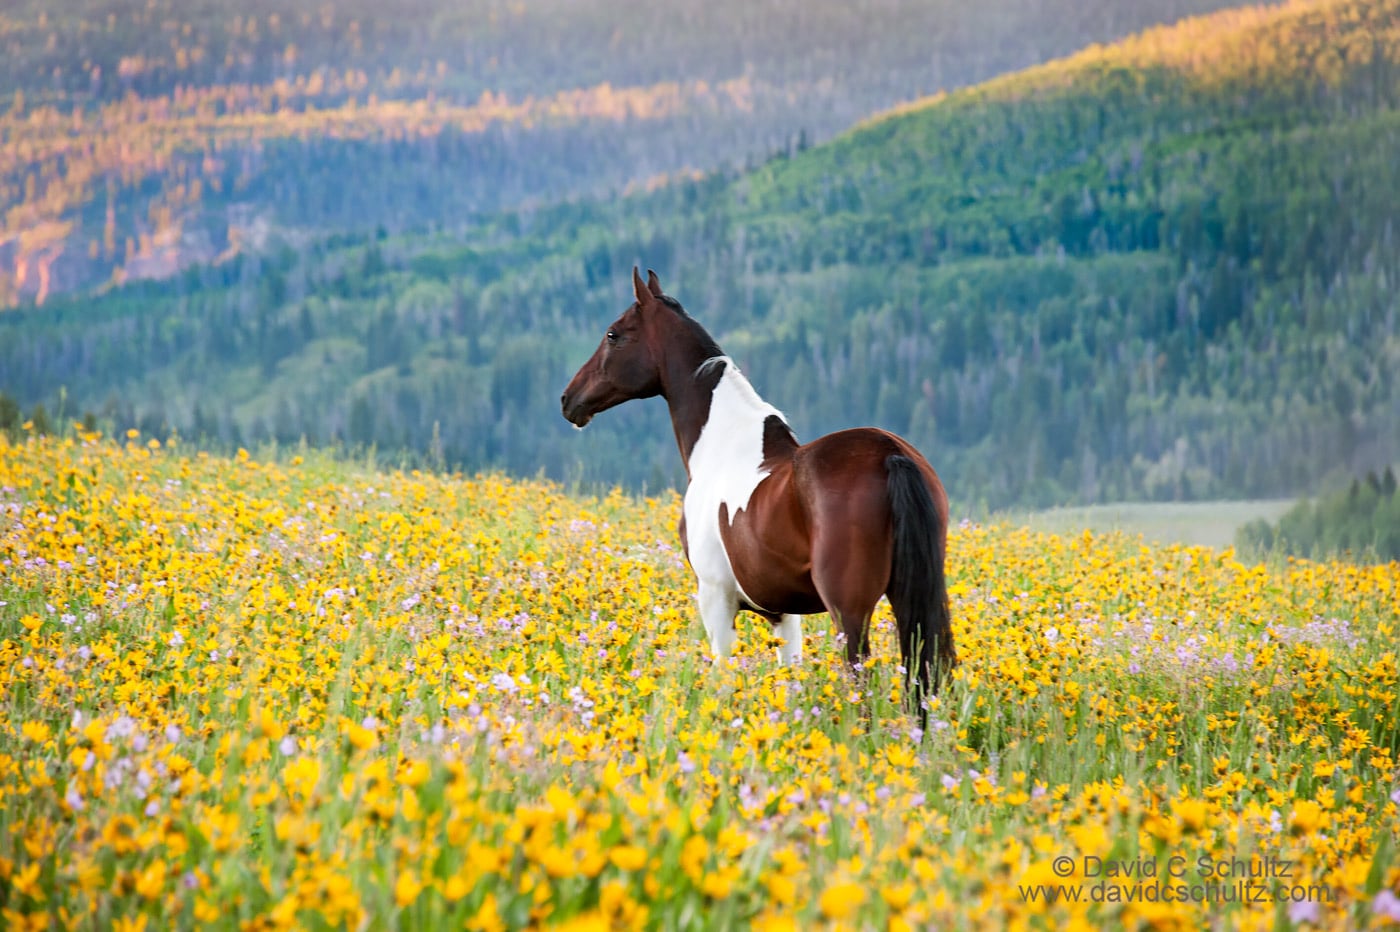 Horse in a field of wildflowers - Image #47-928